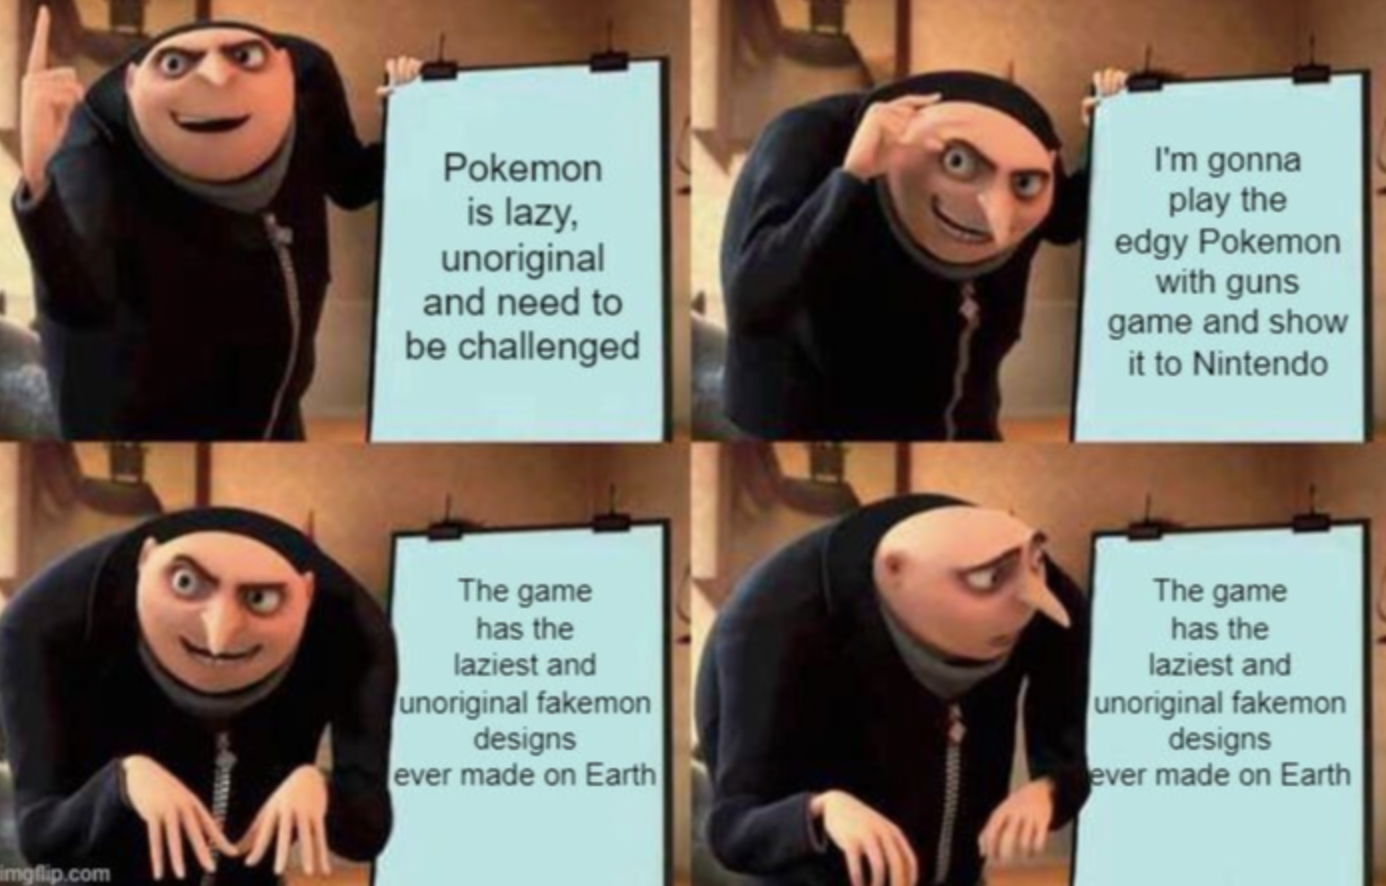 plan failed meme - imgflip.com Pokemon is lazy, unoriginal and need to be challenged The game has the laziest and unoriginal fakemon designs ever made on Earth I'm gonna play the edgy Pokemon with guns game and show it to Nintendo The game has the laziest